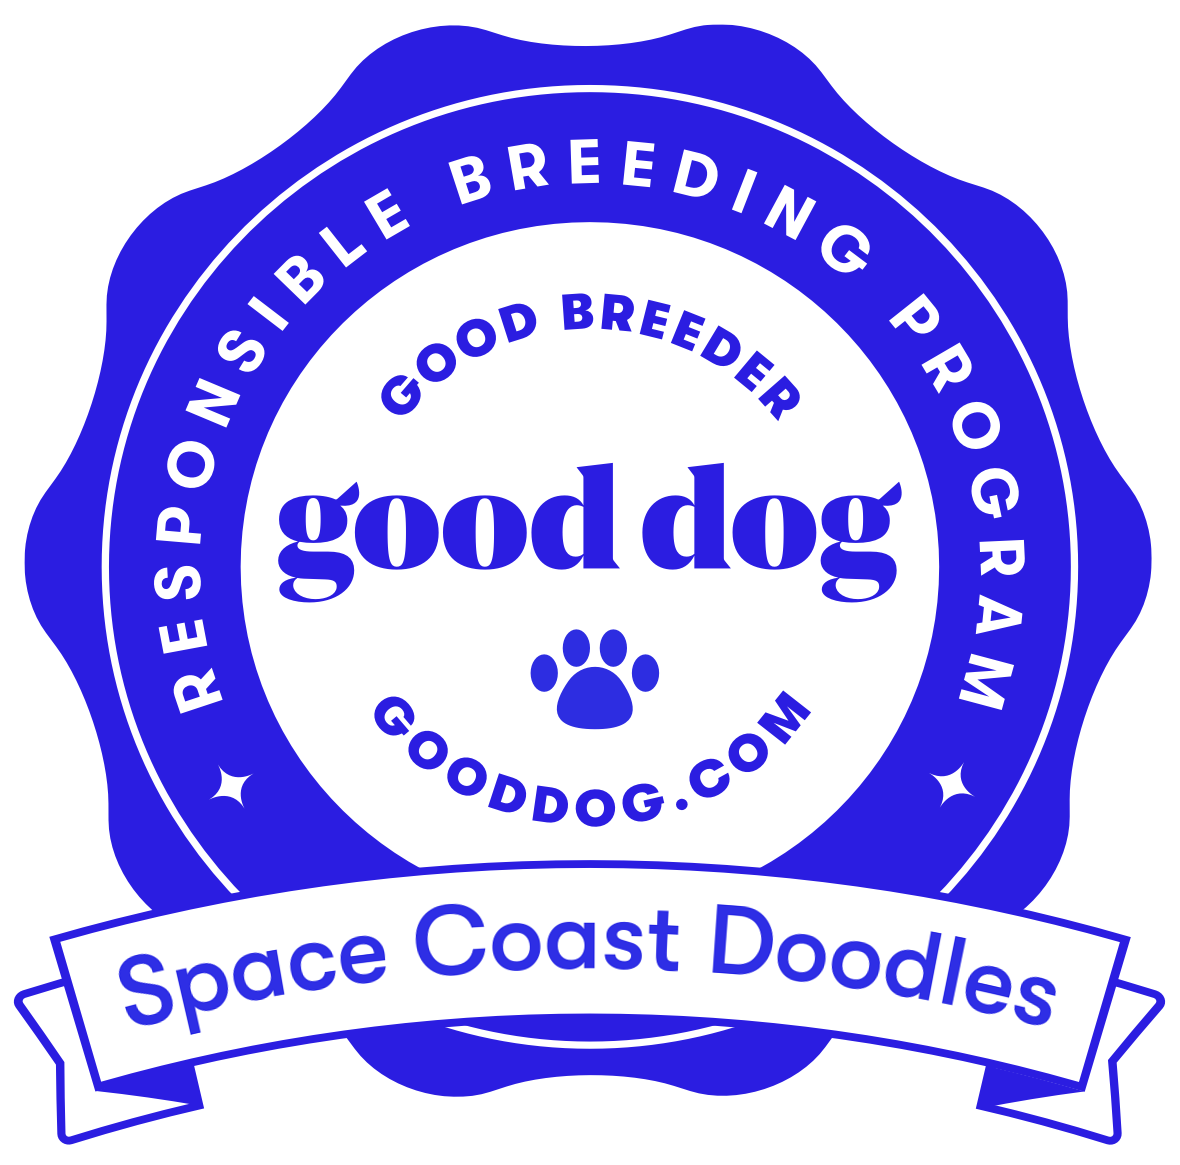 Space Coast Doodles is an approved Good Dog breeder